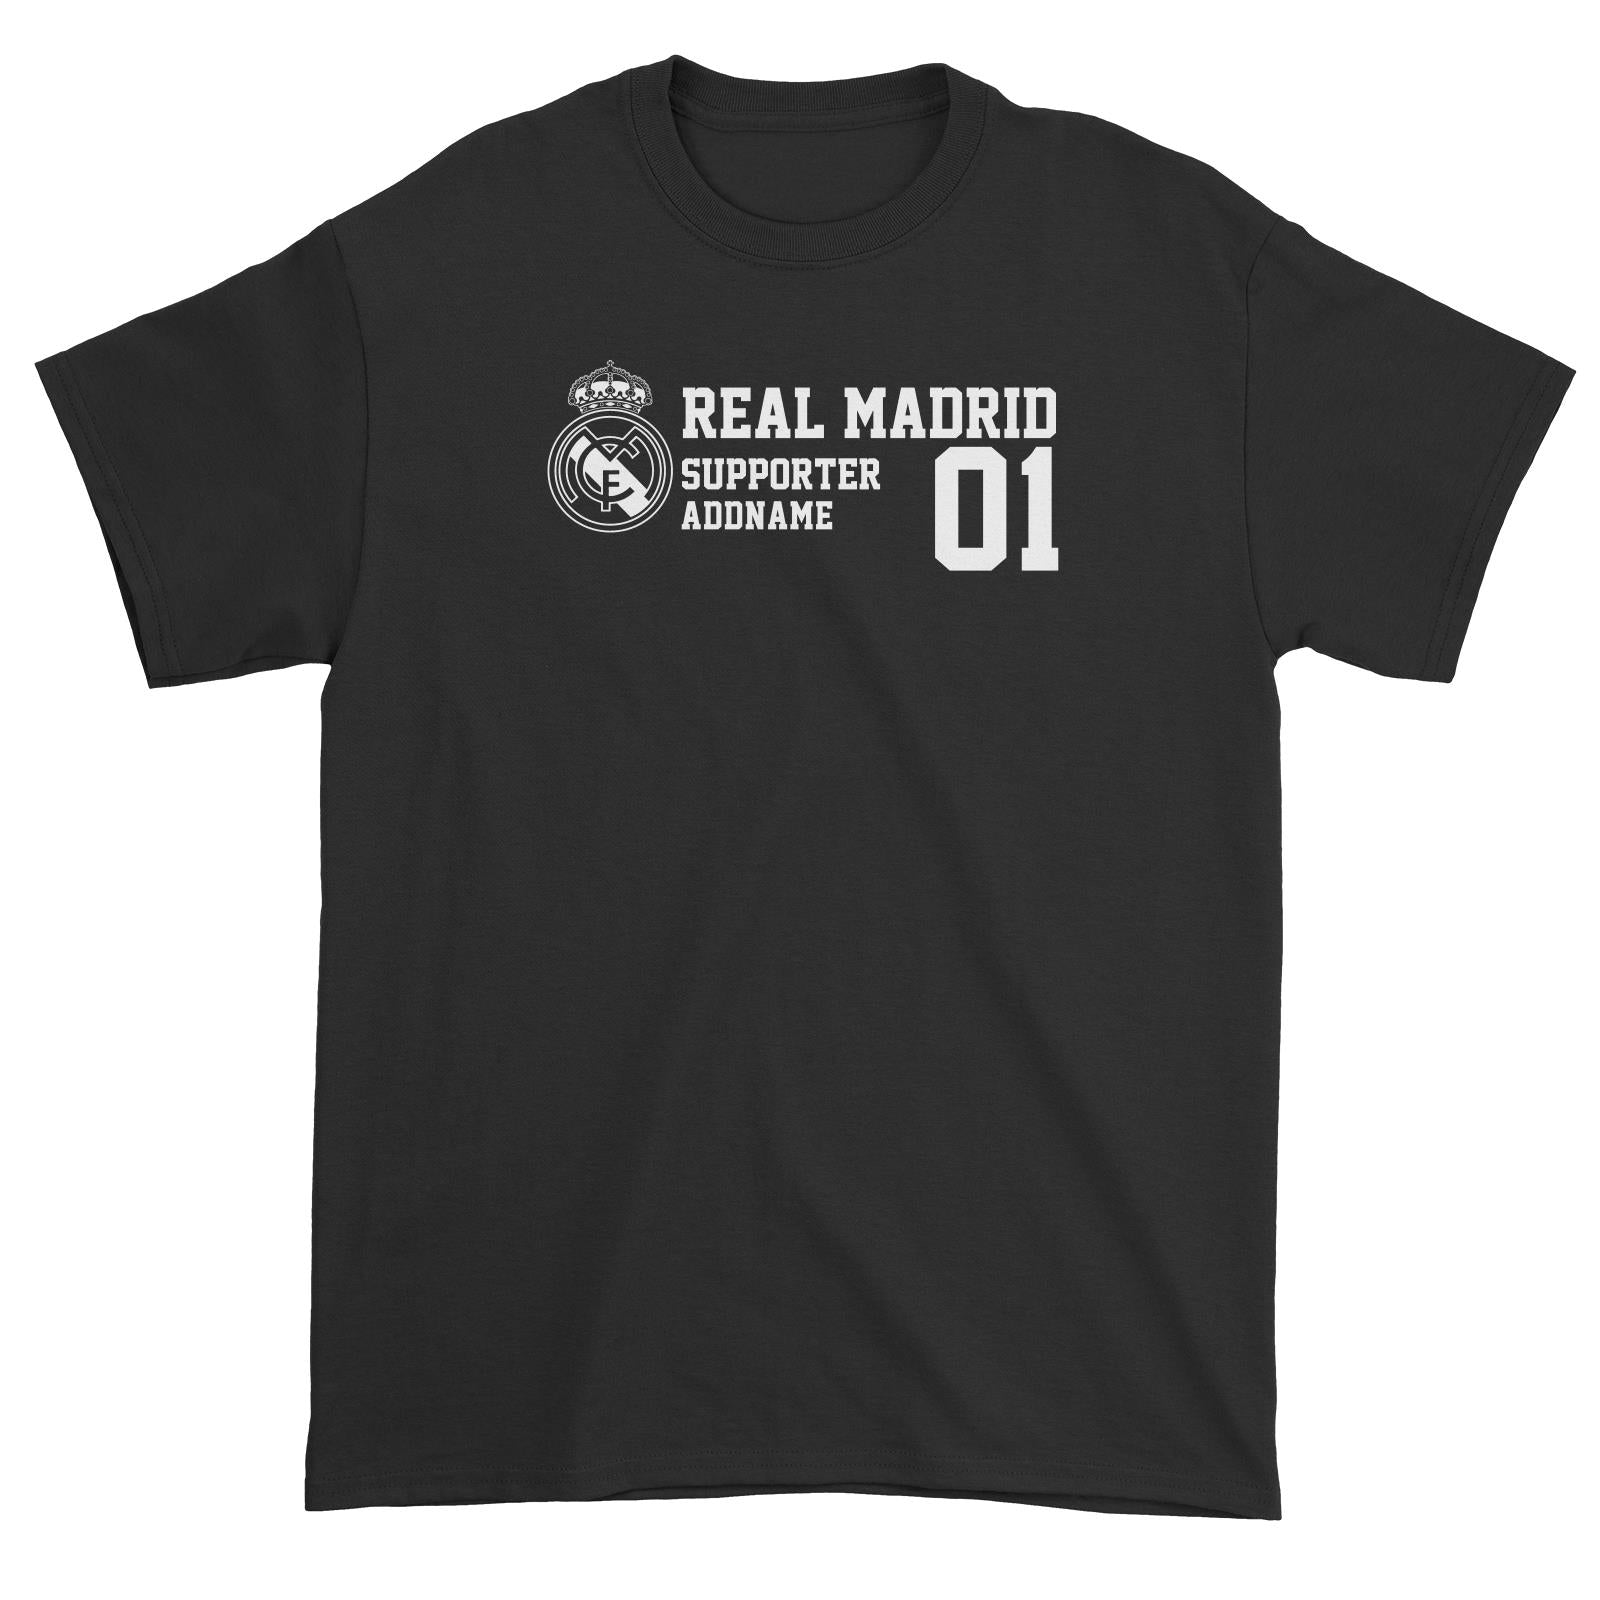 Real Madrid Football Supporter Addname Unisex T-Shirt